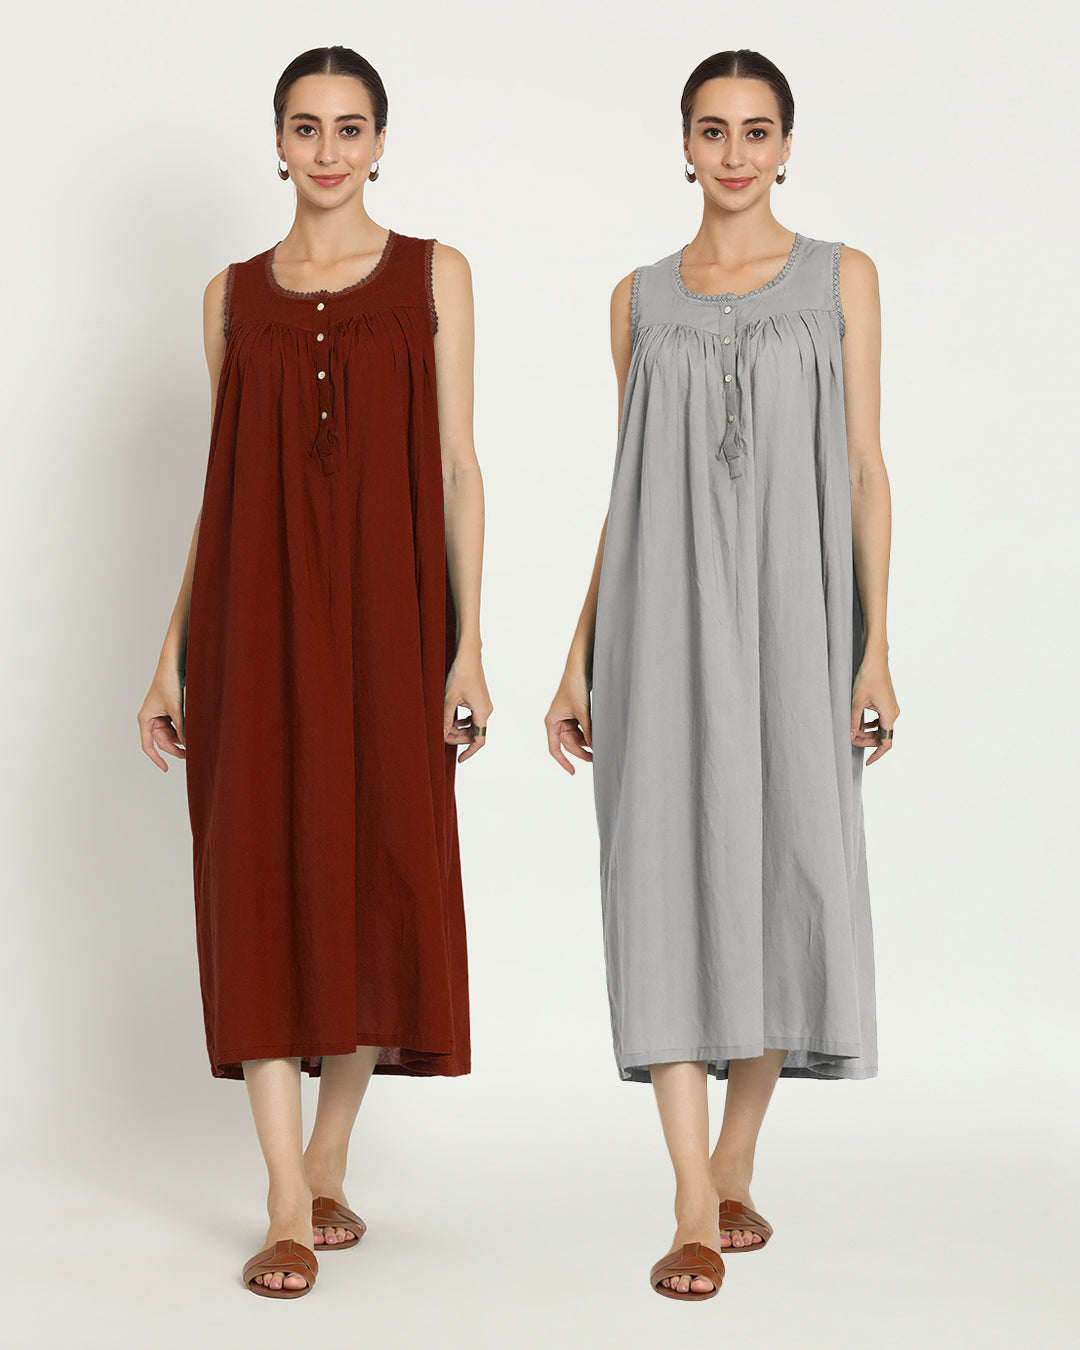 Combo: Russet Red & Iced Grey Moonlight Mirage Nightdress- Set Of 2